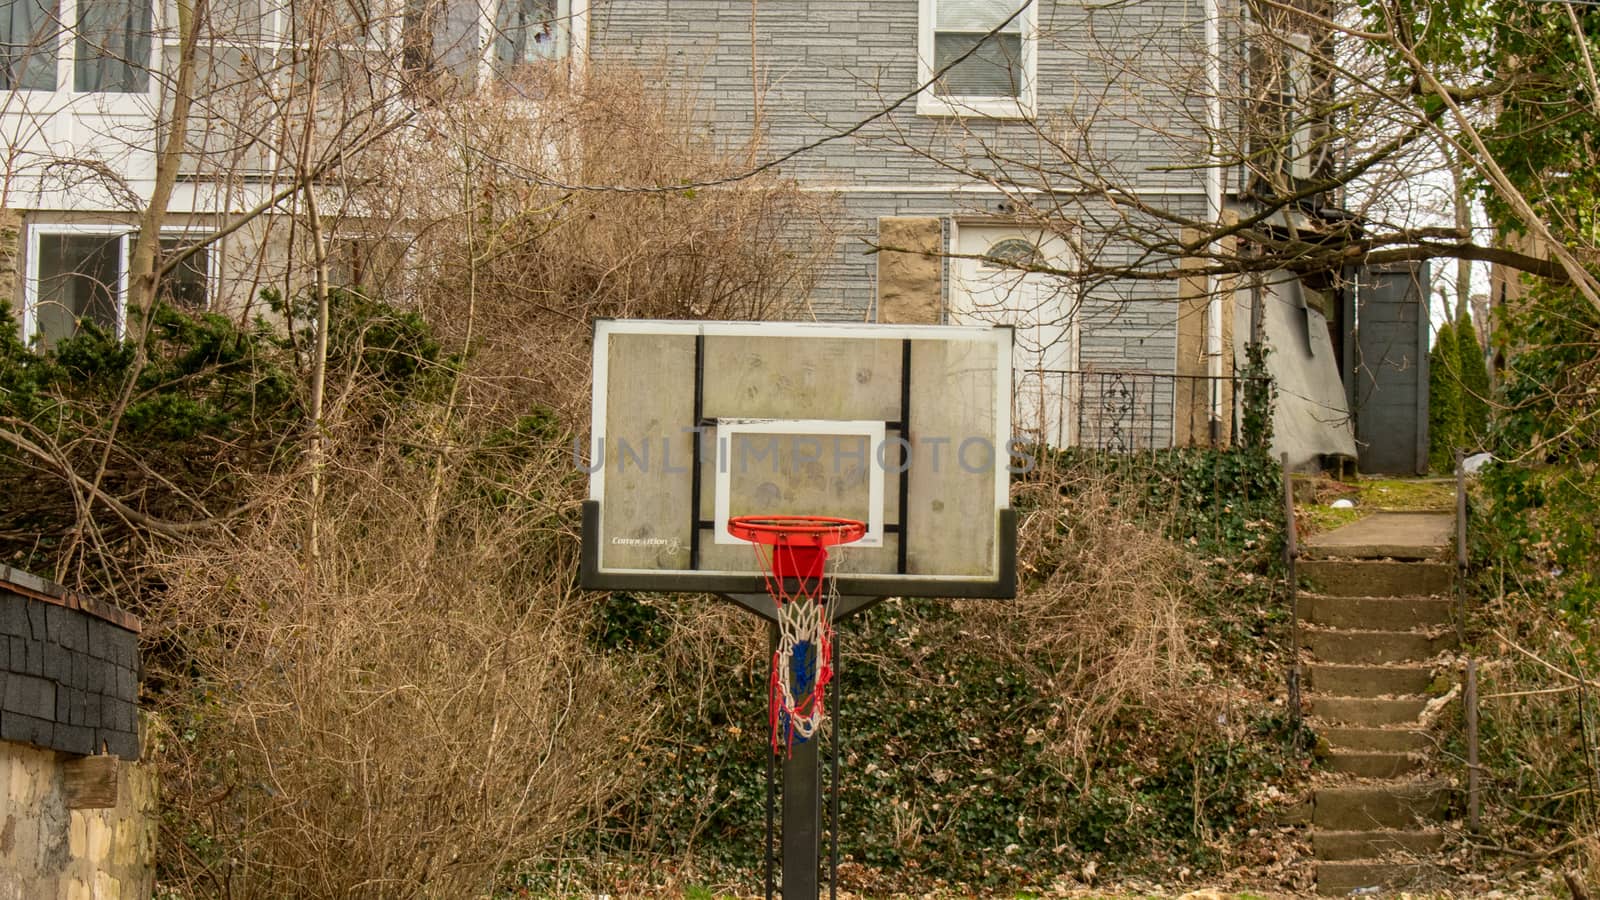 A Basketball Net Hanging in Front of an Overgrown Suburban Home